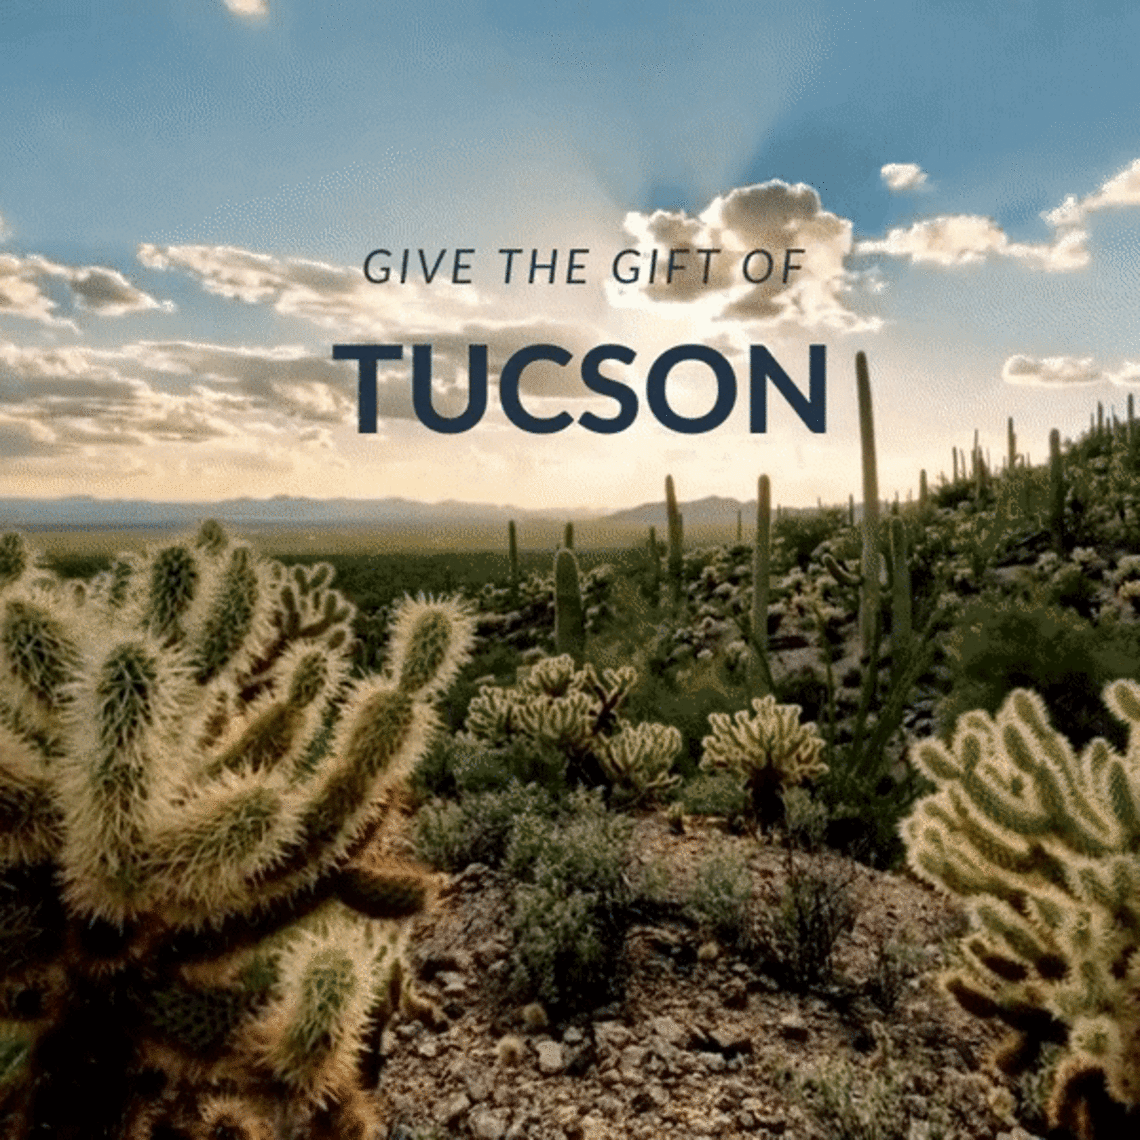 Give the gift of Tucson. Video of soaring over a desert.